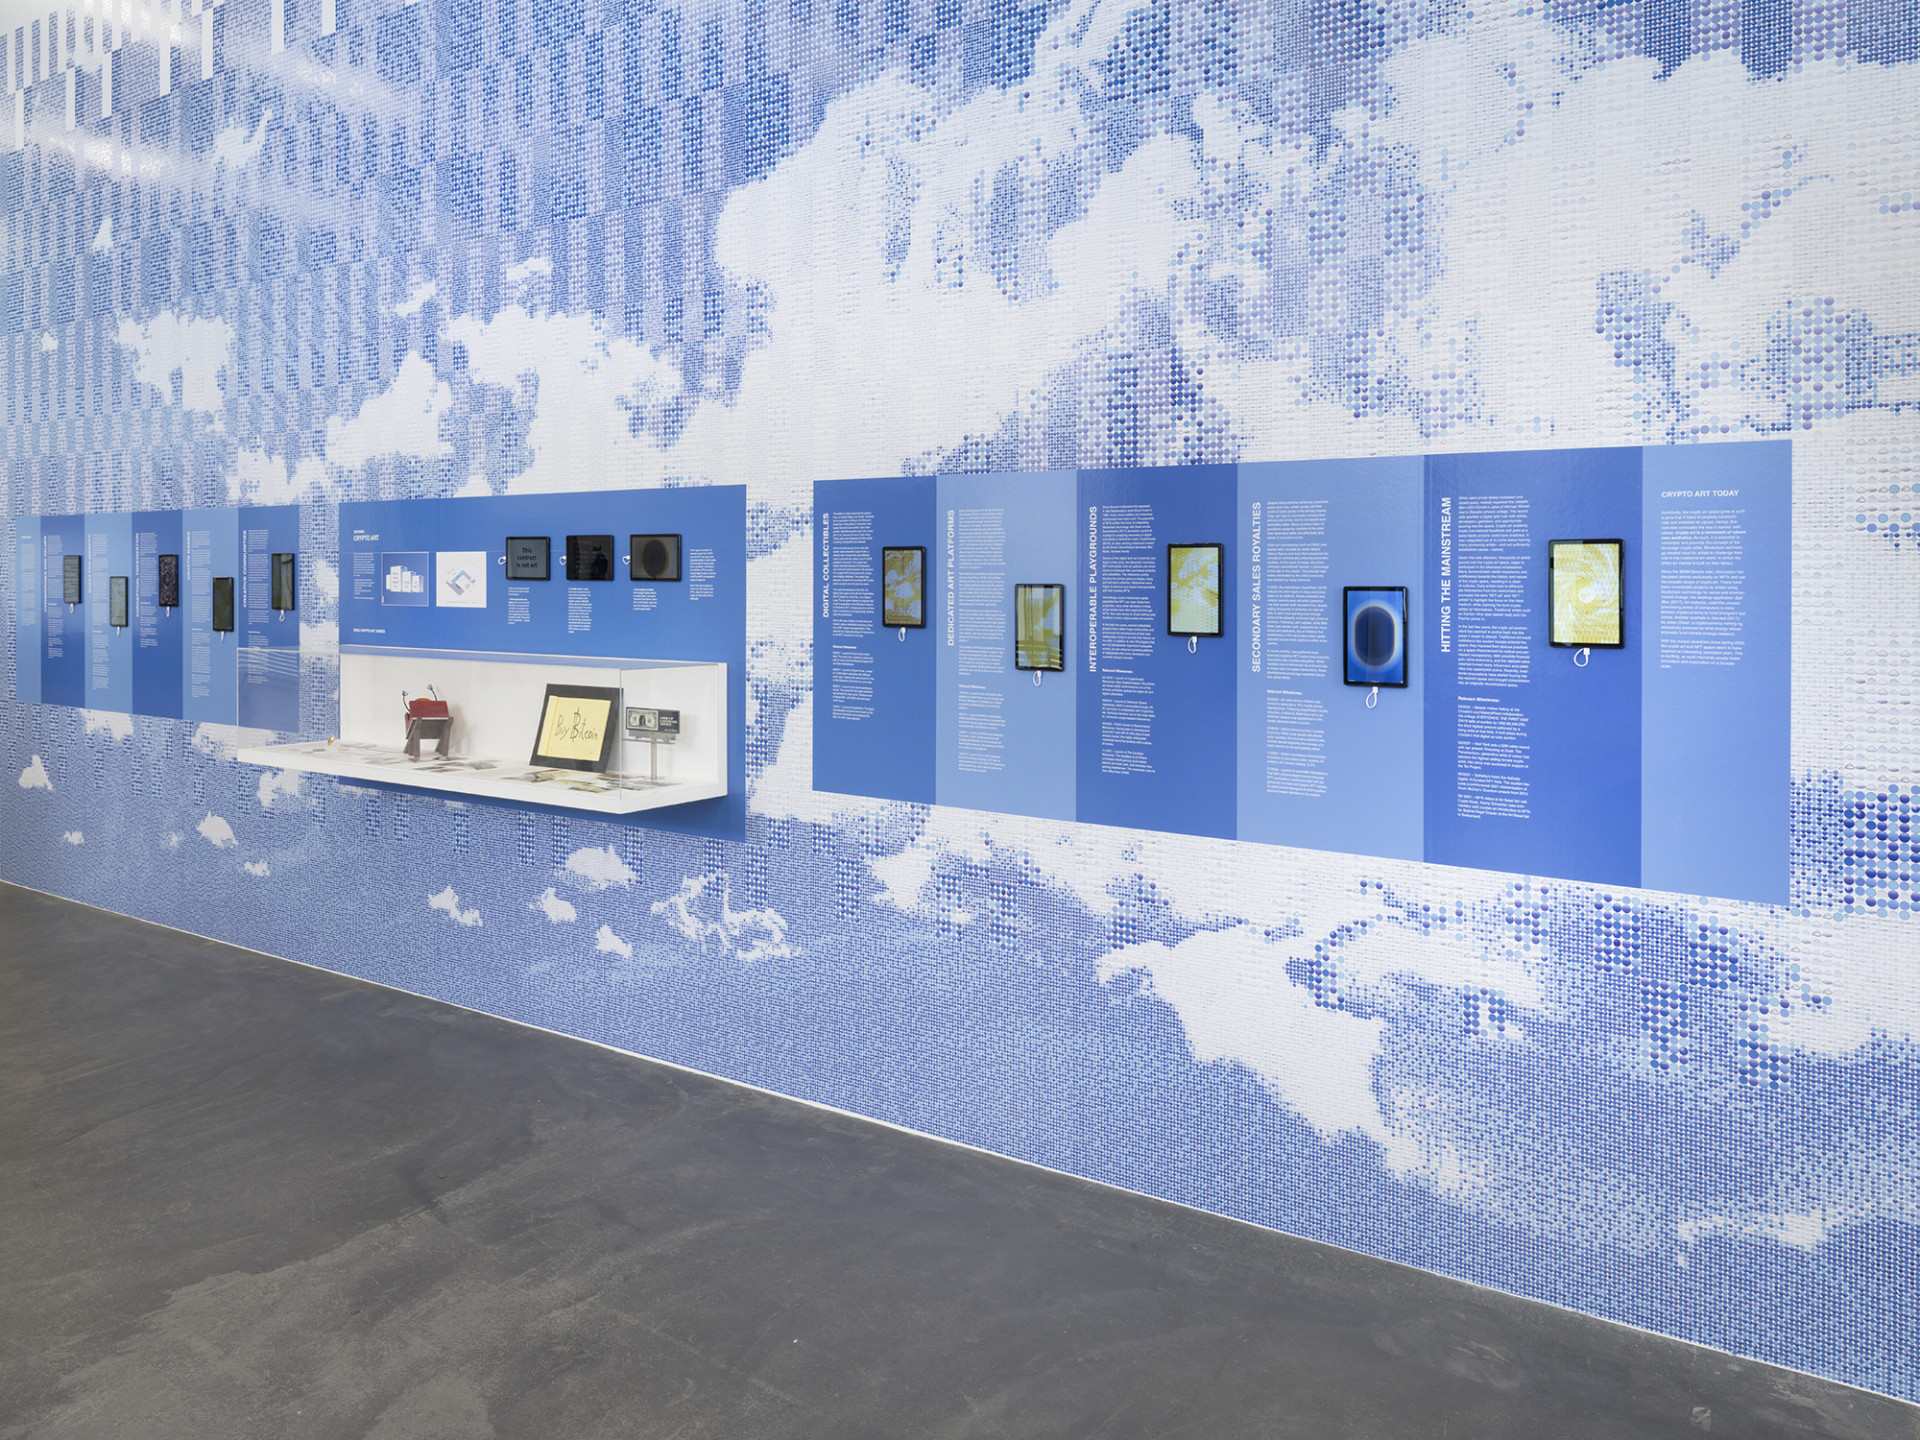 A view of an installation on a wall featuring several text-heavy printed panels, with blue and white designs evoking clouds with ASCII art